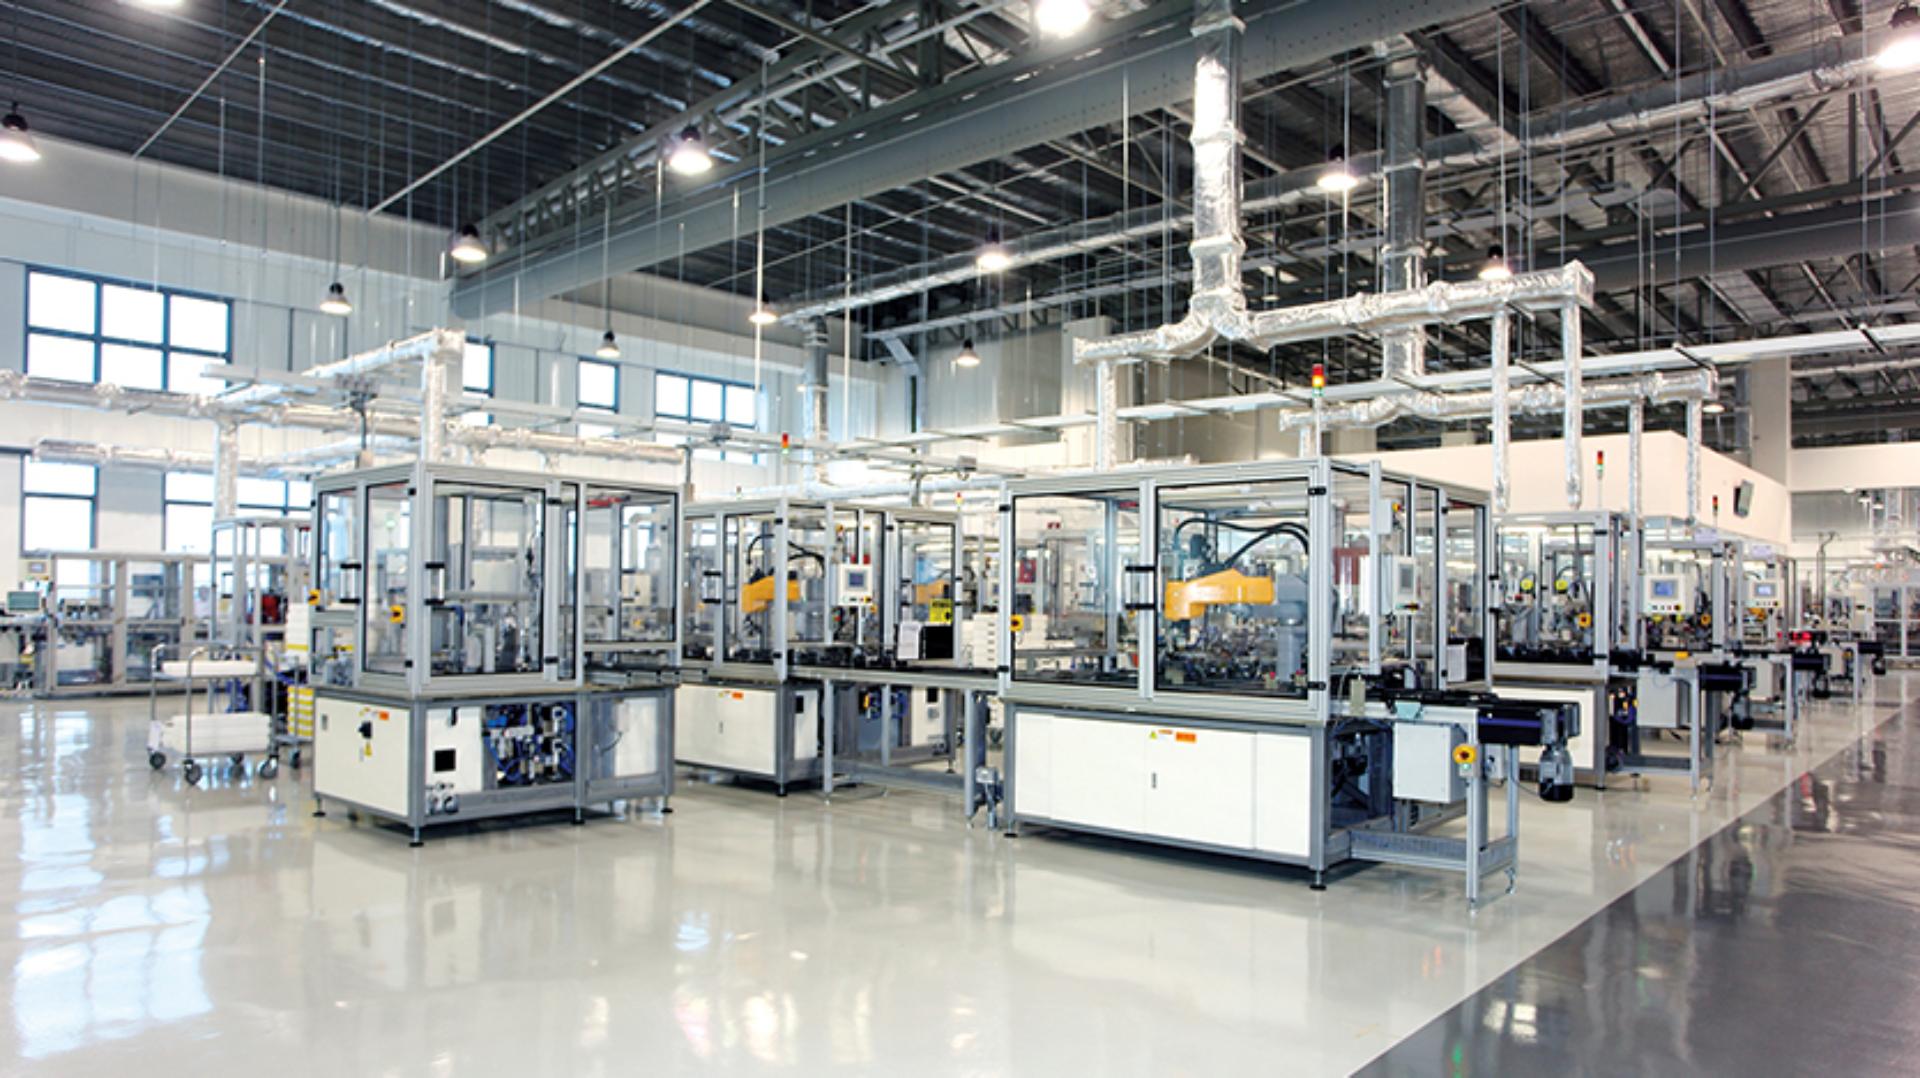 Sealed units within the Singapore Advanced Manufacturing facility